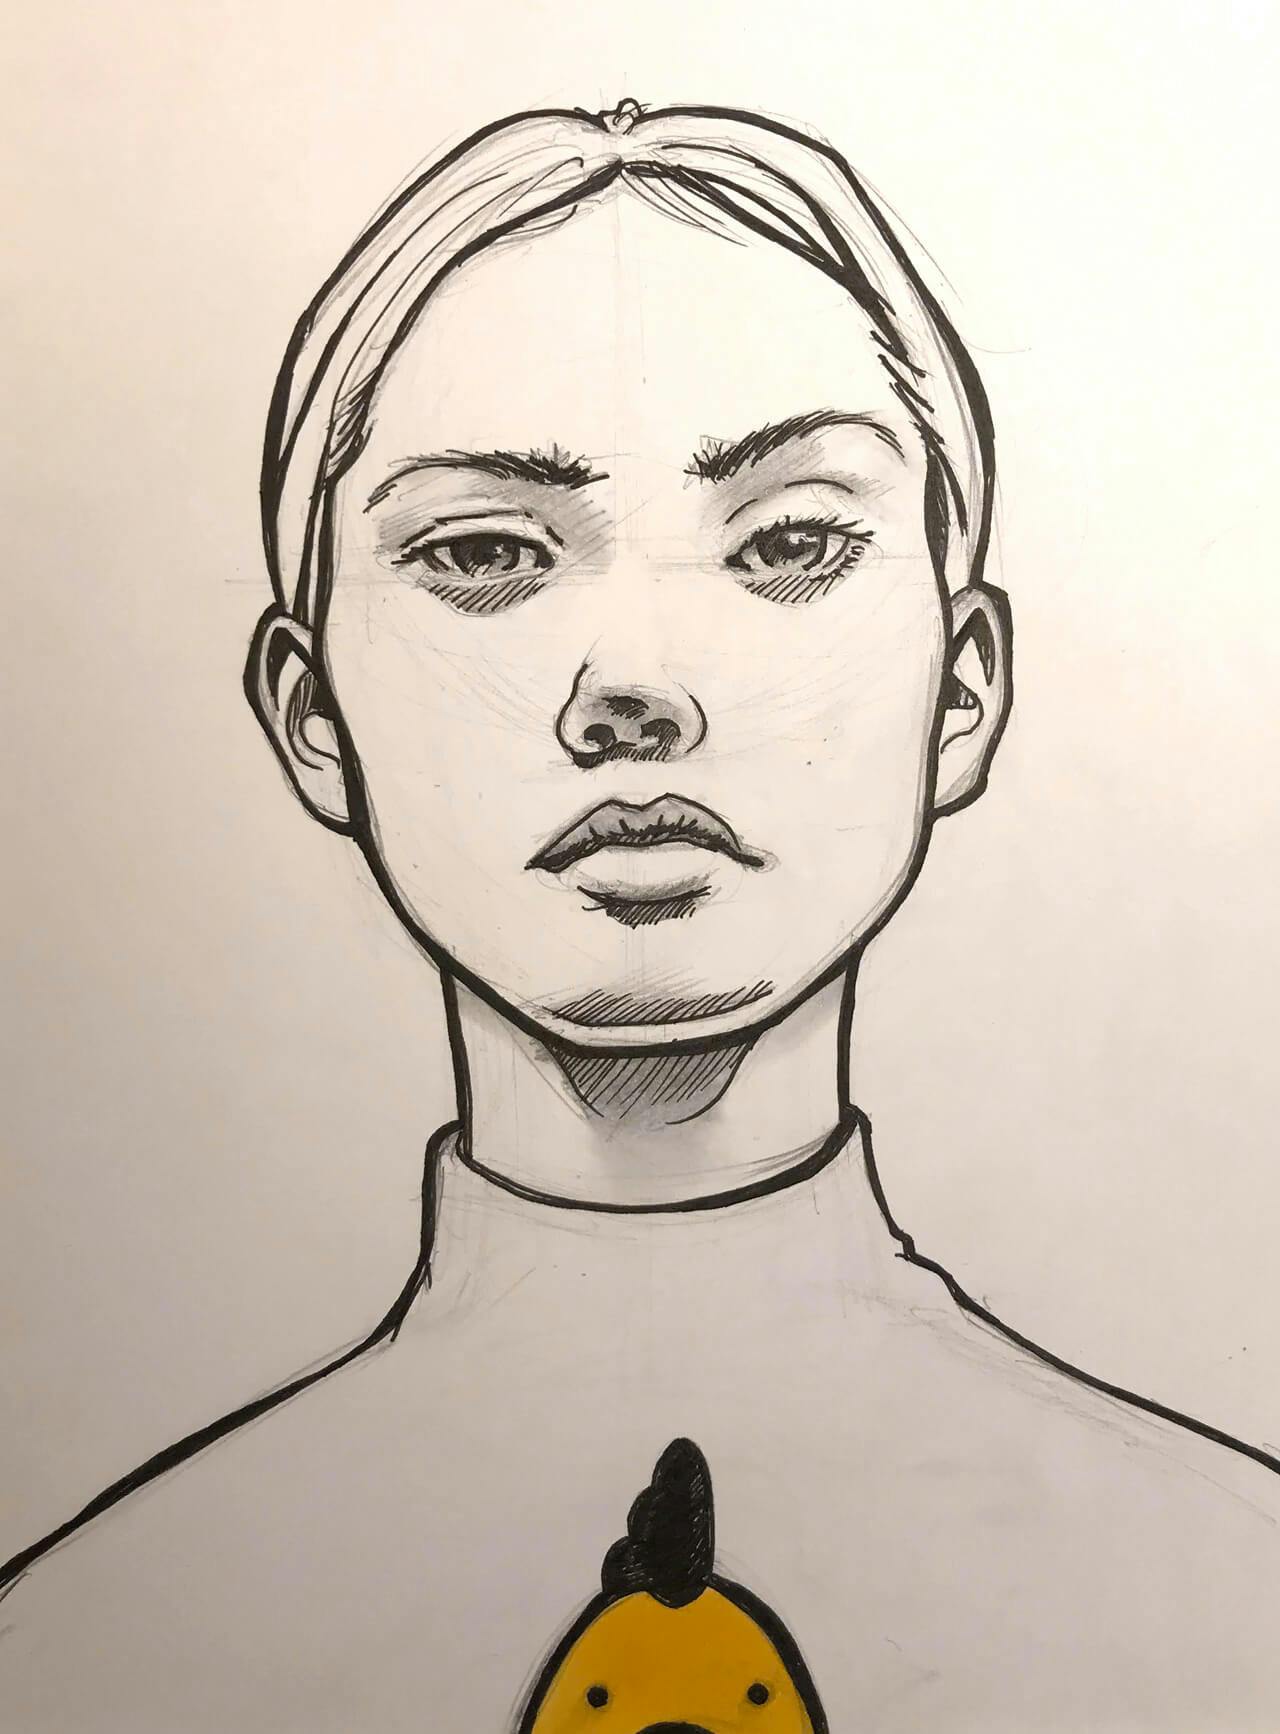 Ink & marker sketch of a young woman with a yellow chick on here shirt, looking forward